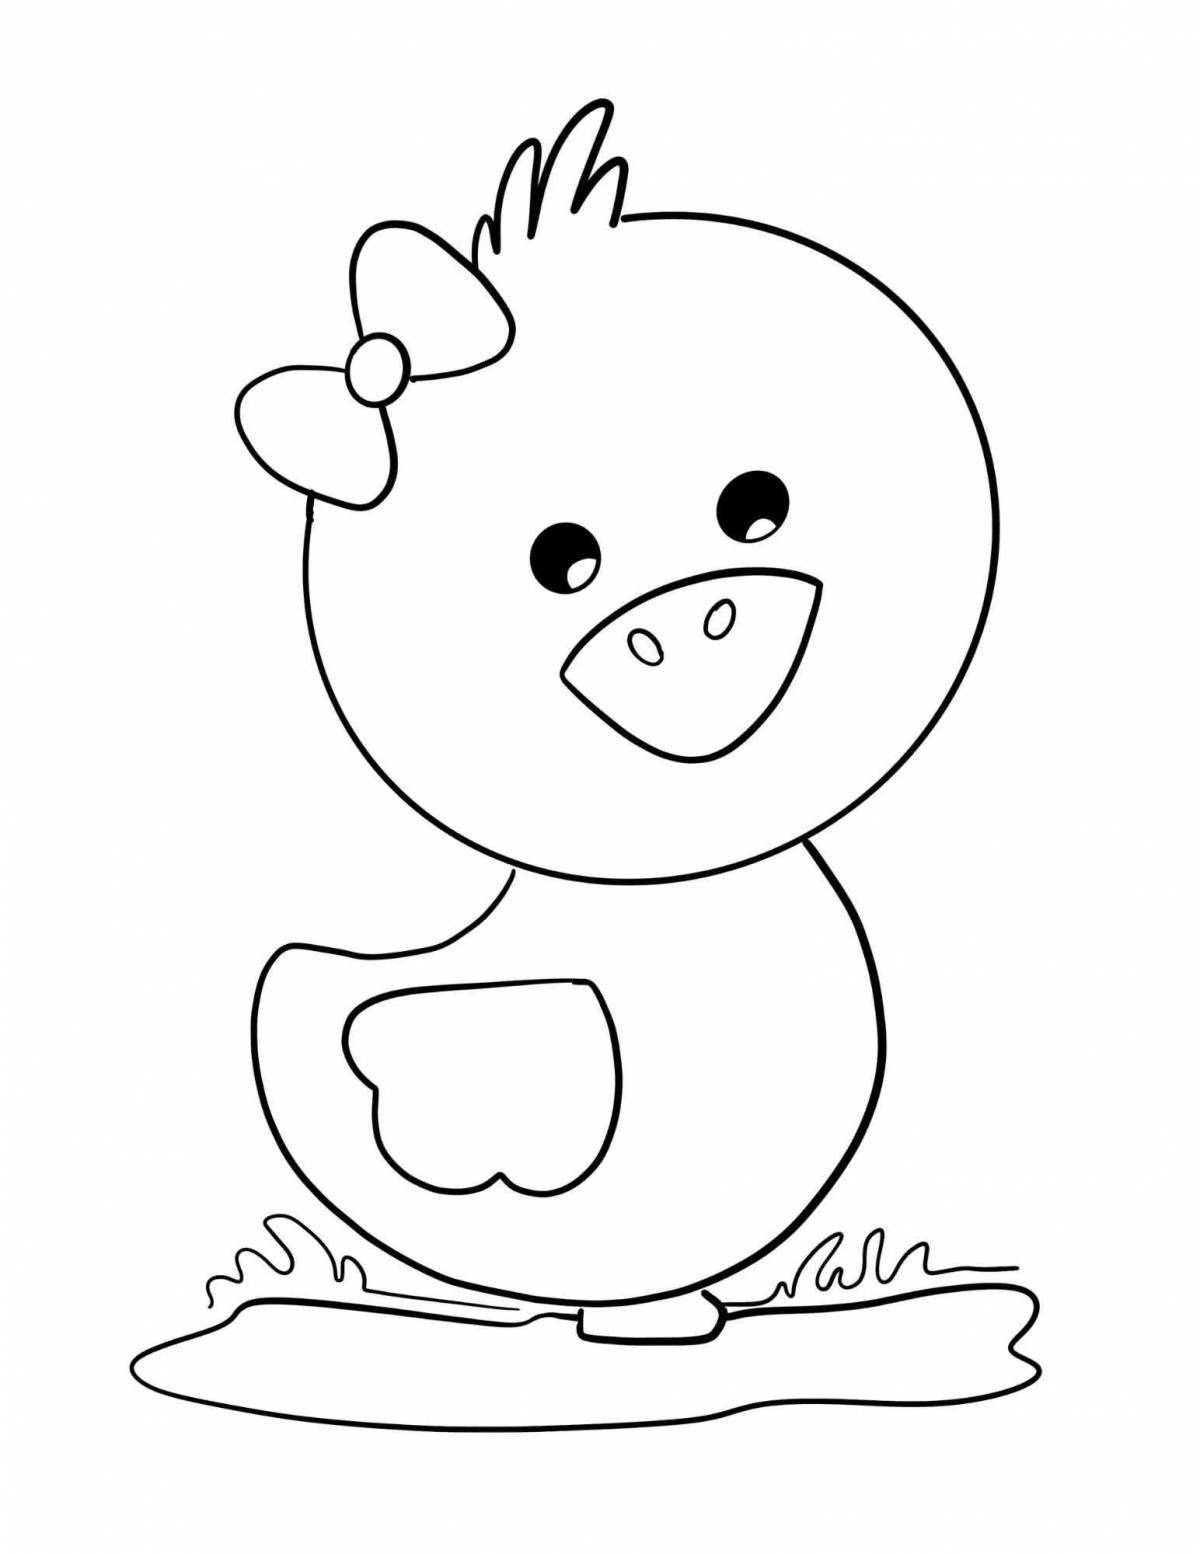 Fascinating paper duck food coloring page